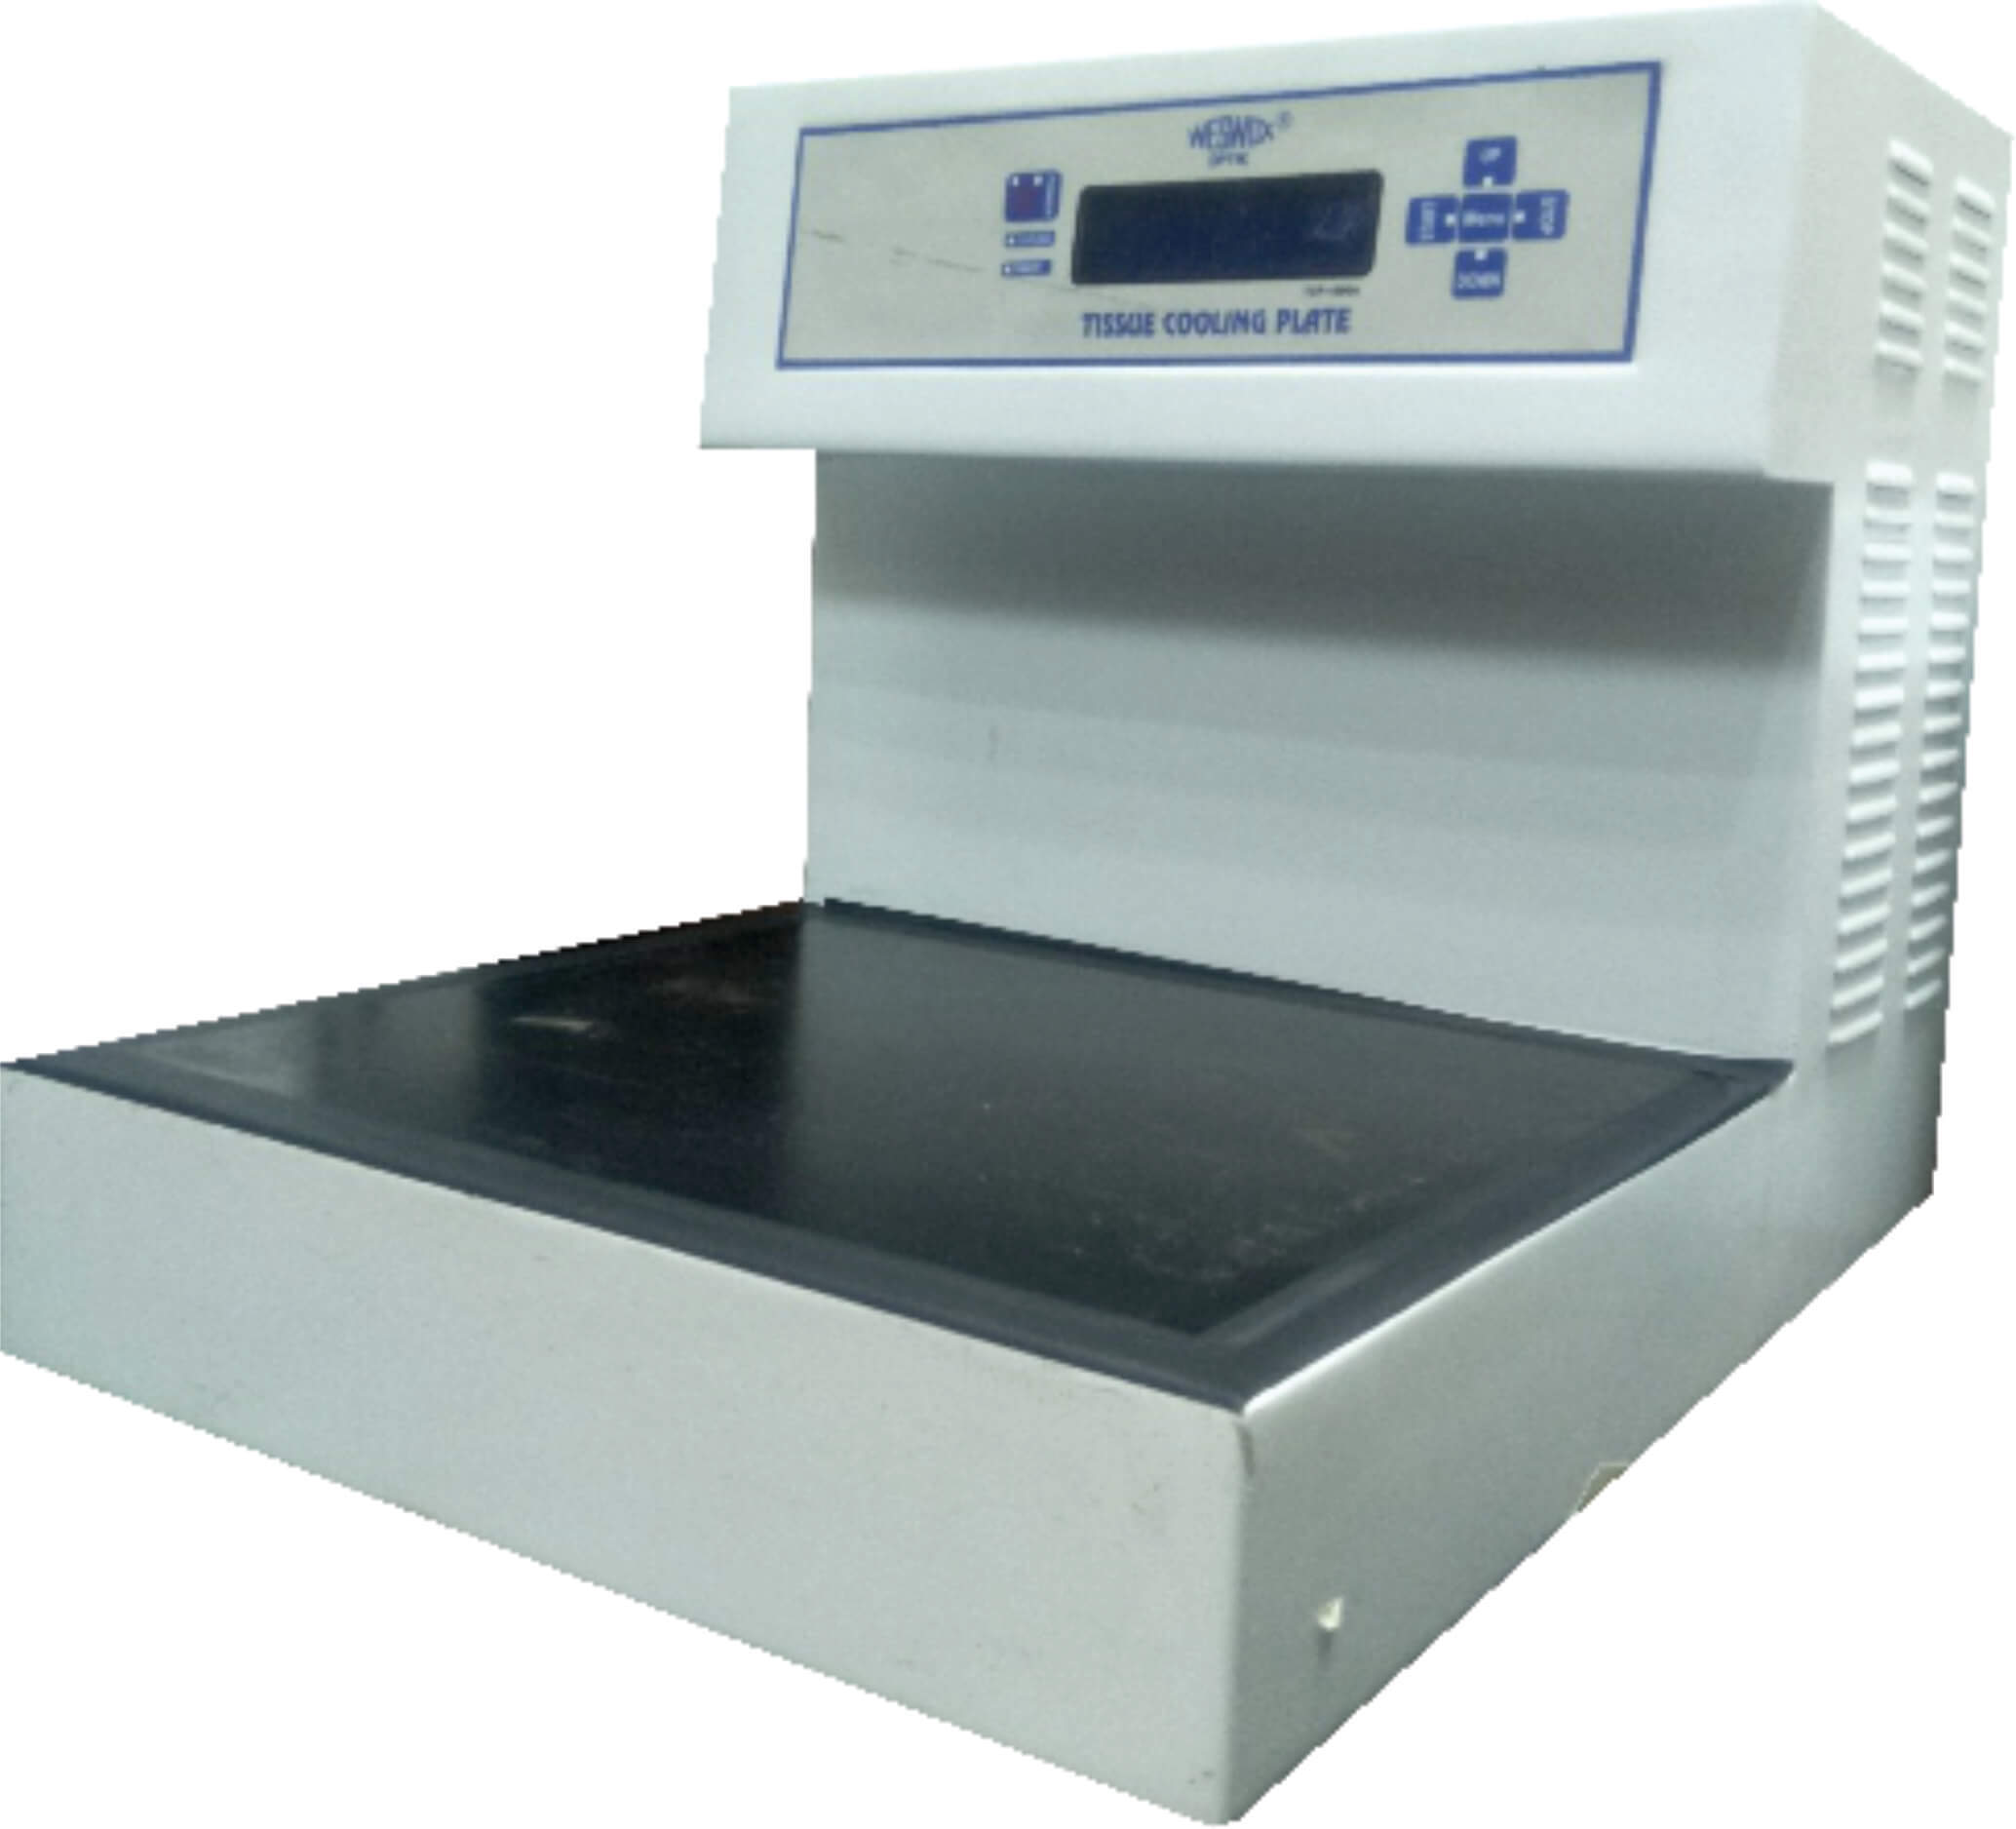 TISSUE COOLING PROCESSOR